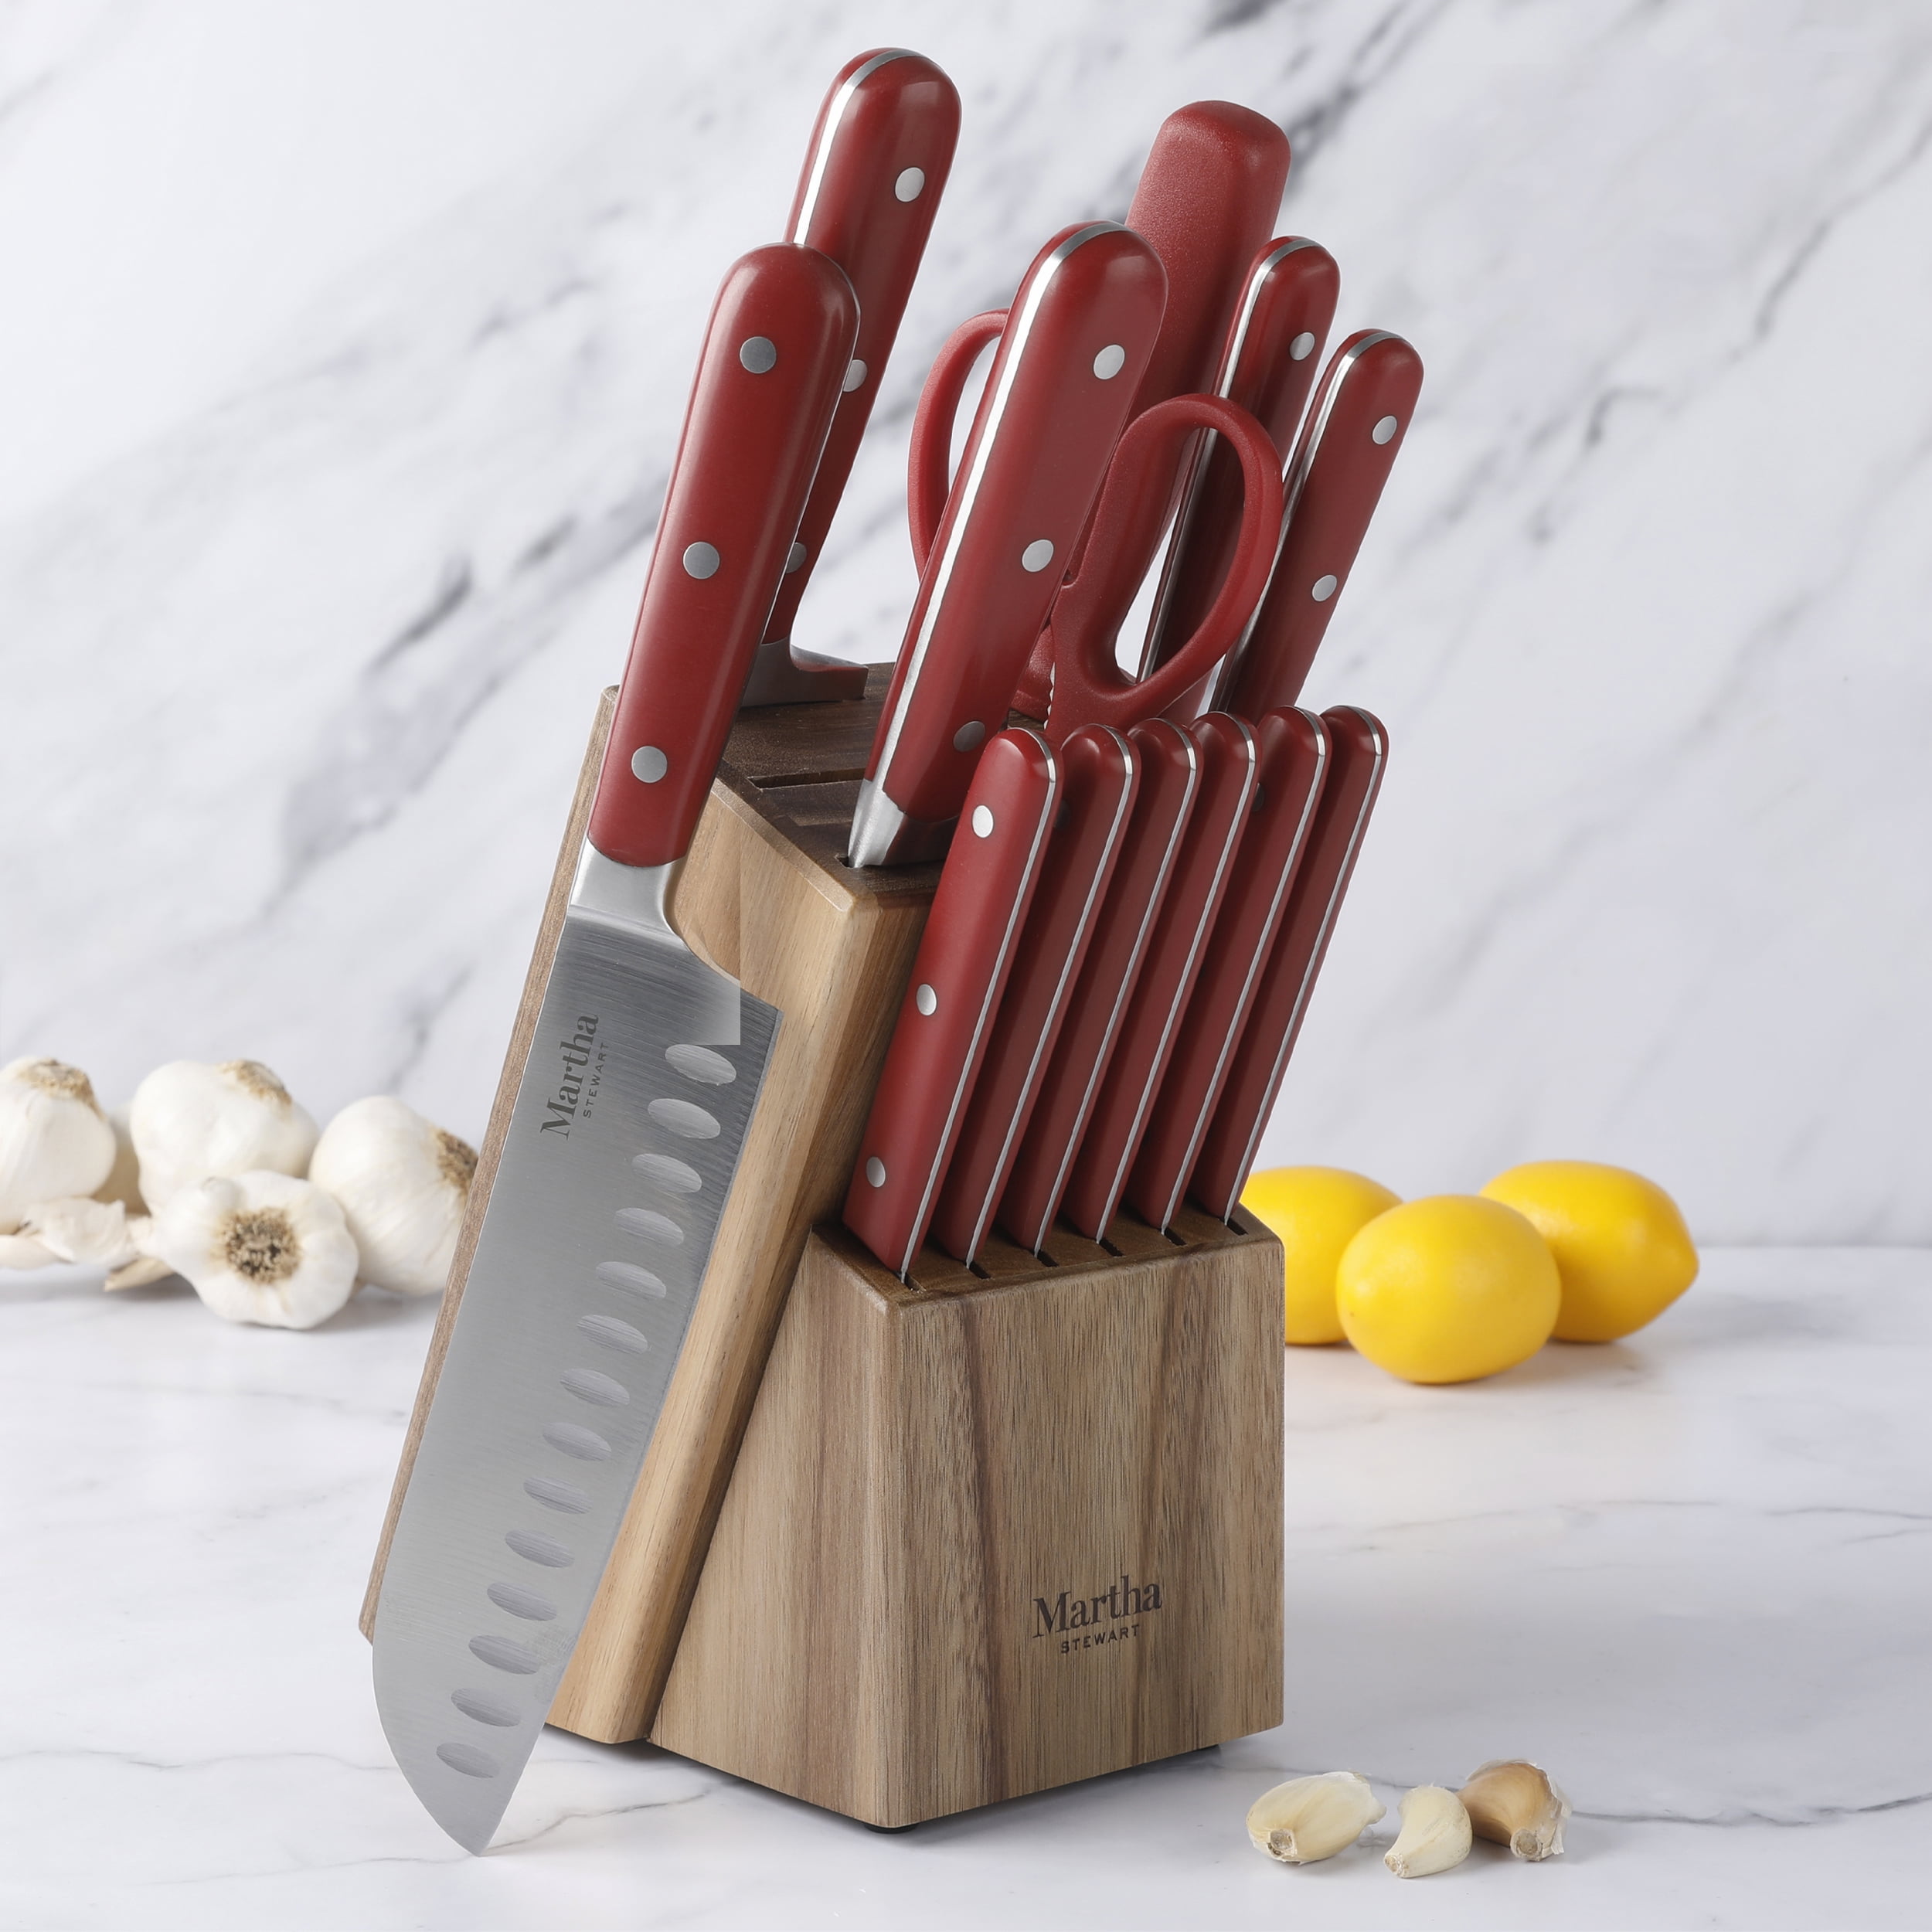 Martha Stewart - This 14-piece Martha Stewart cutlery set provides cutting  edge performance and style. Whether you're chopping tomatoes or slicing  bread, these thoughtfully designed knives will get the job done. You